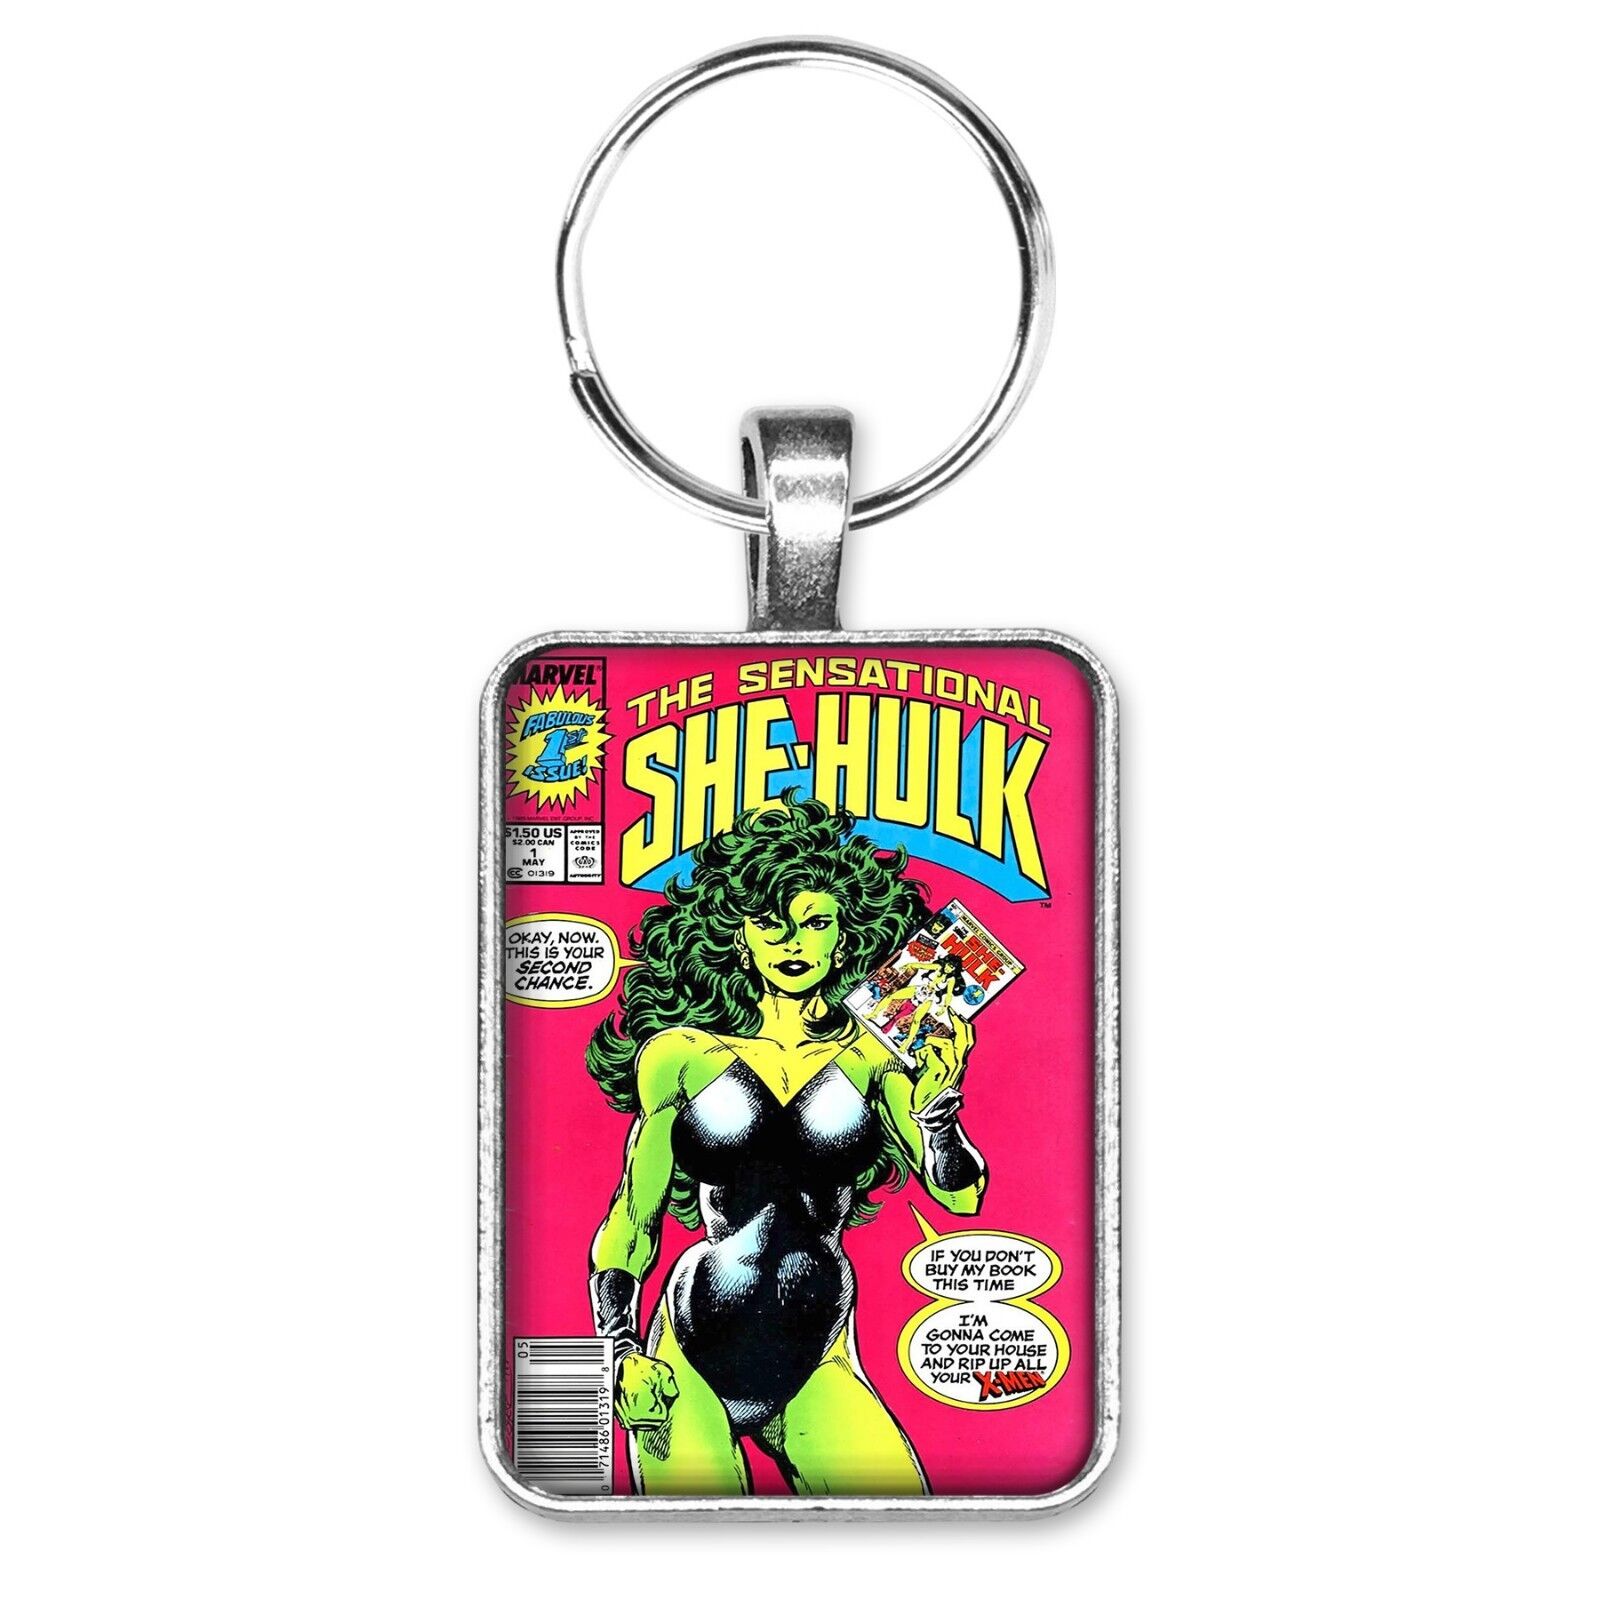 The Sensational She-Hulk #1 Cover Key Ring or Necklace Classic Comic Book